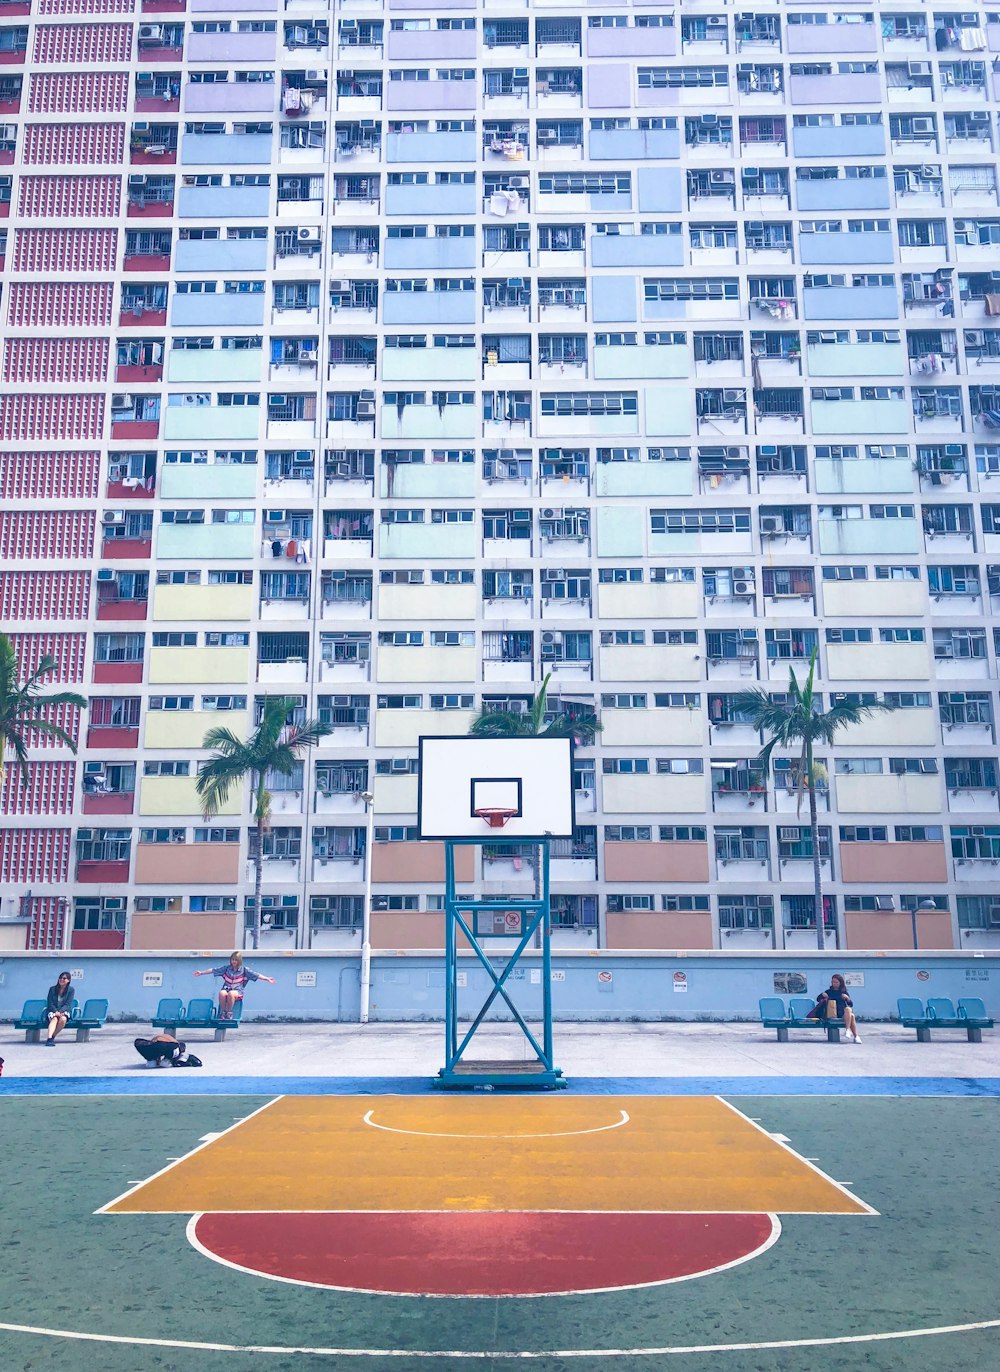 basketball court in front of concrete high-rise building during daytime